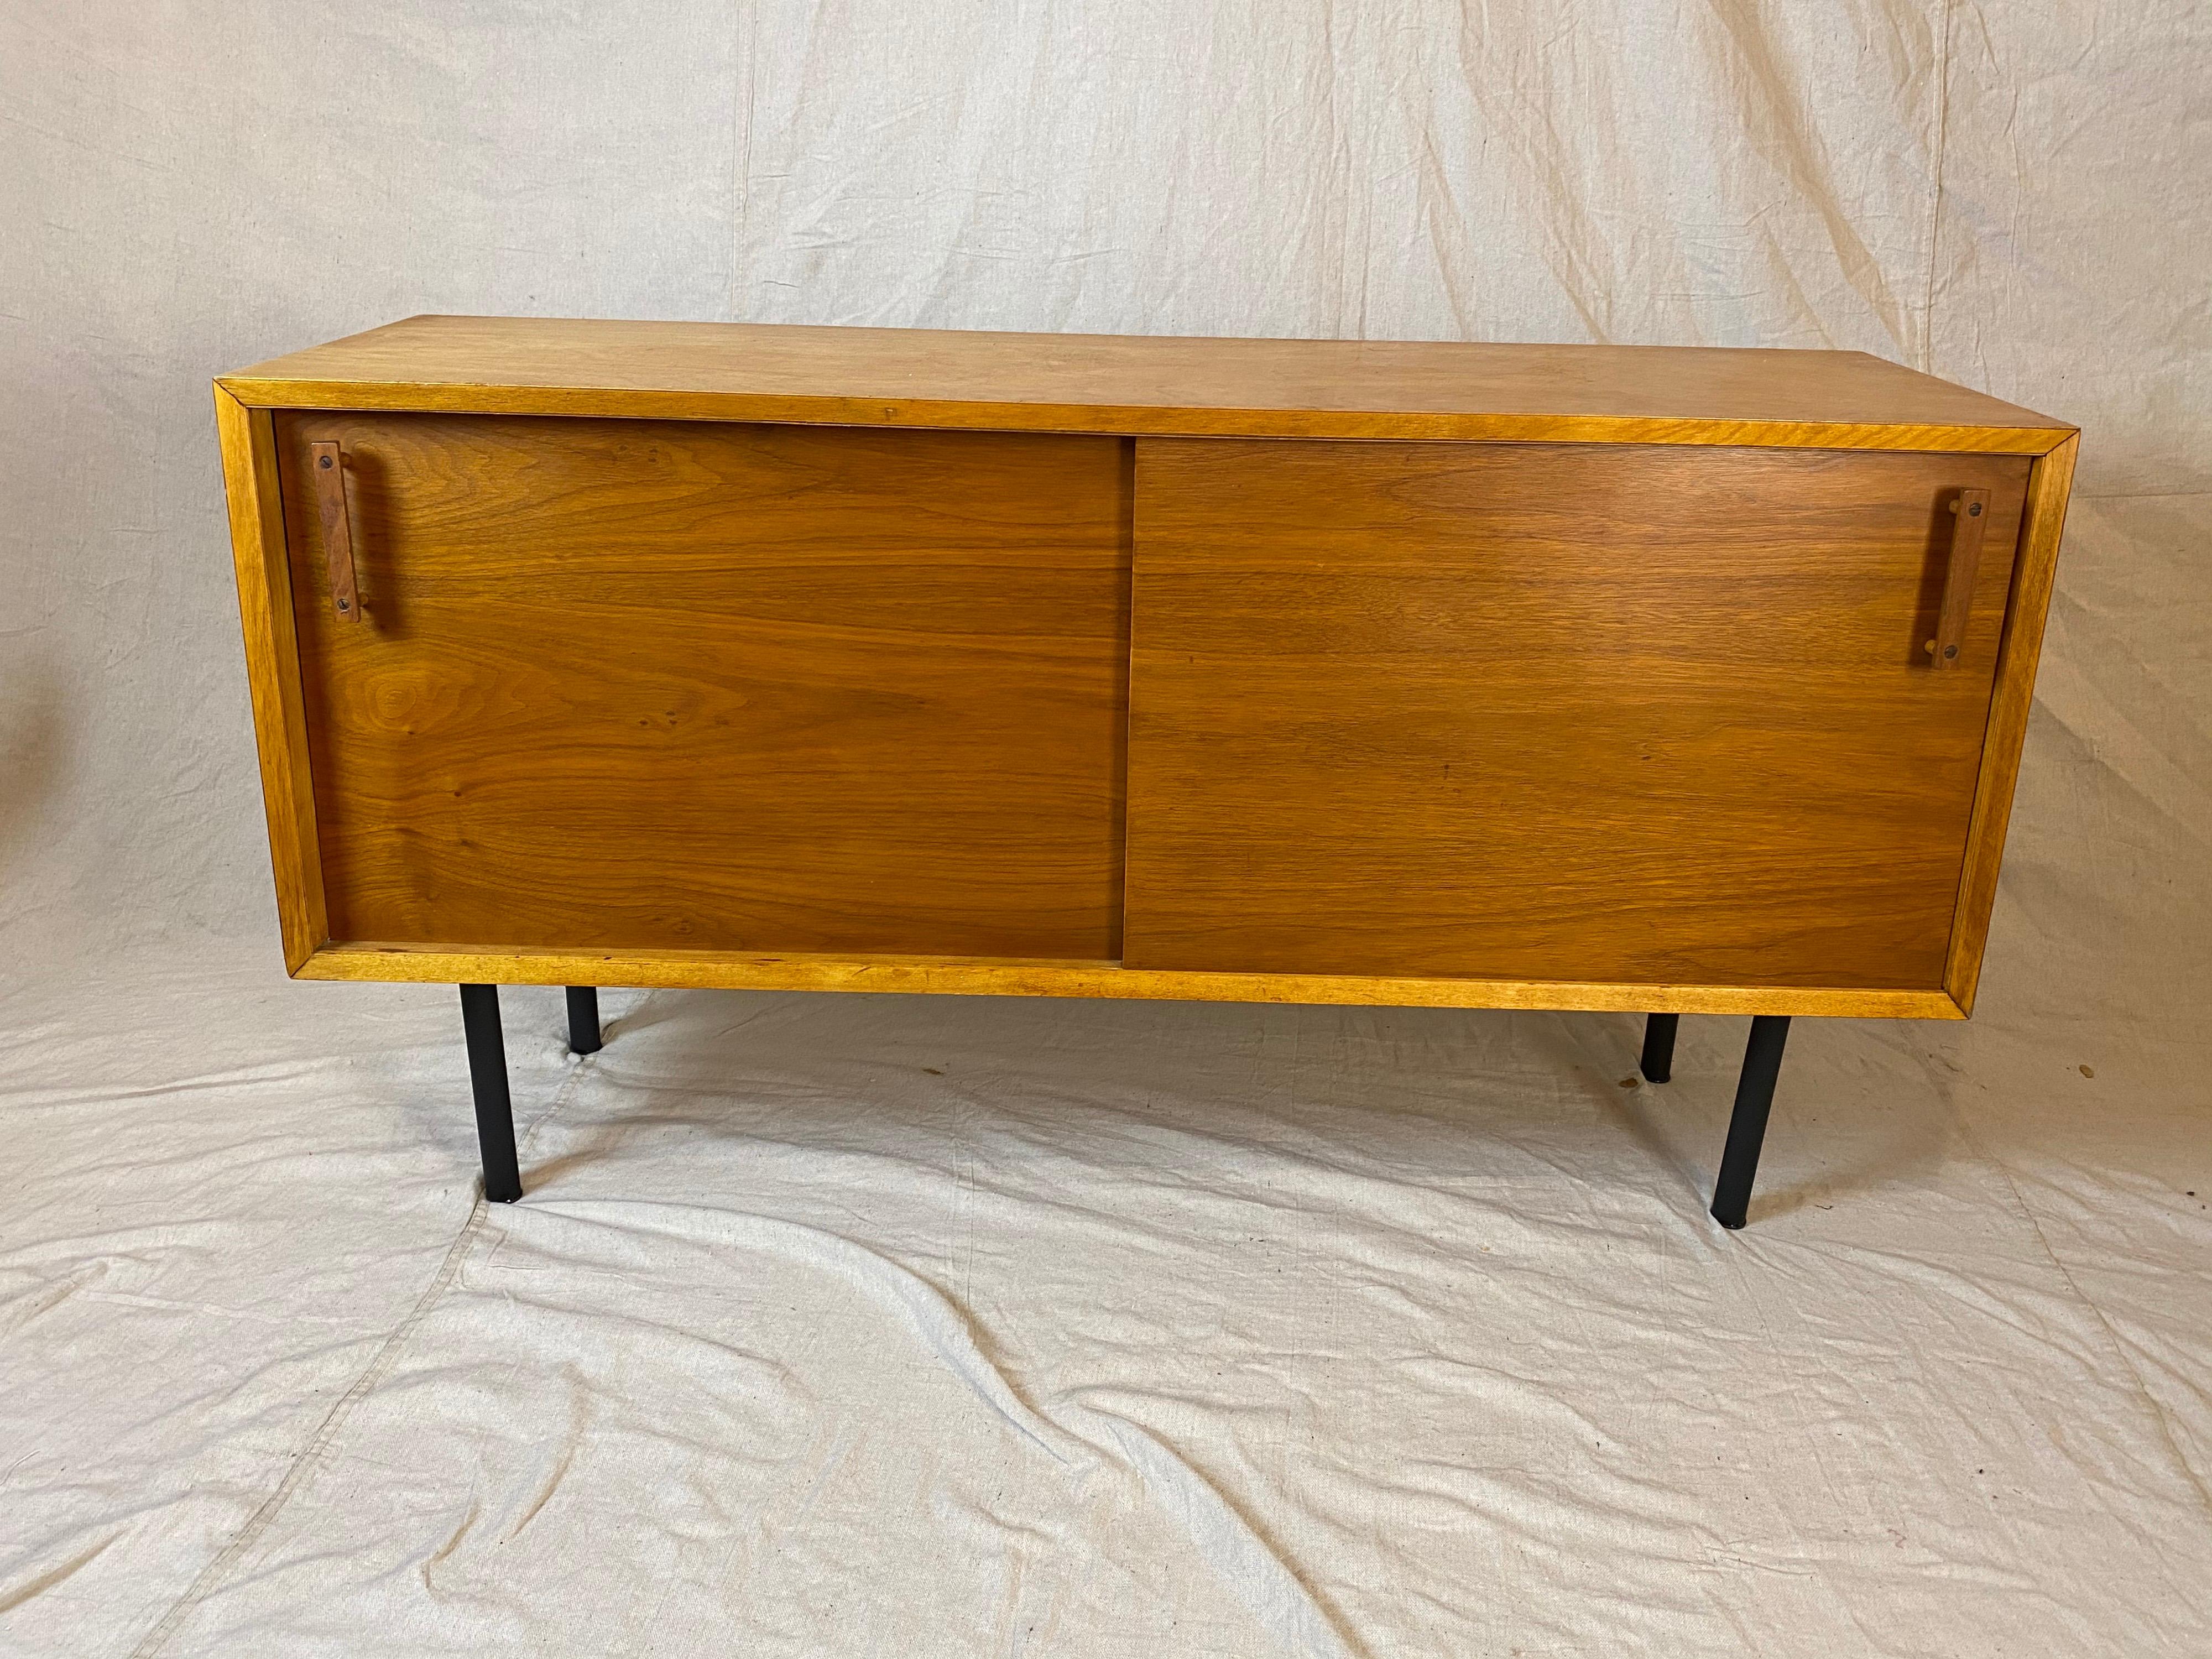 DesignCraft 2-tone credenza with angled sides. Front of cabinet has a slight angle with gives the cabinet a visual twist! Bottom is 15.75 deep and top depth is 14.5. Outside of cabinet is birch and sliding doors are walnut. Doors open to reveal